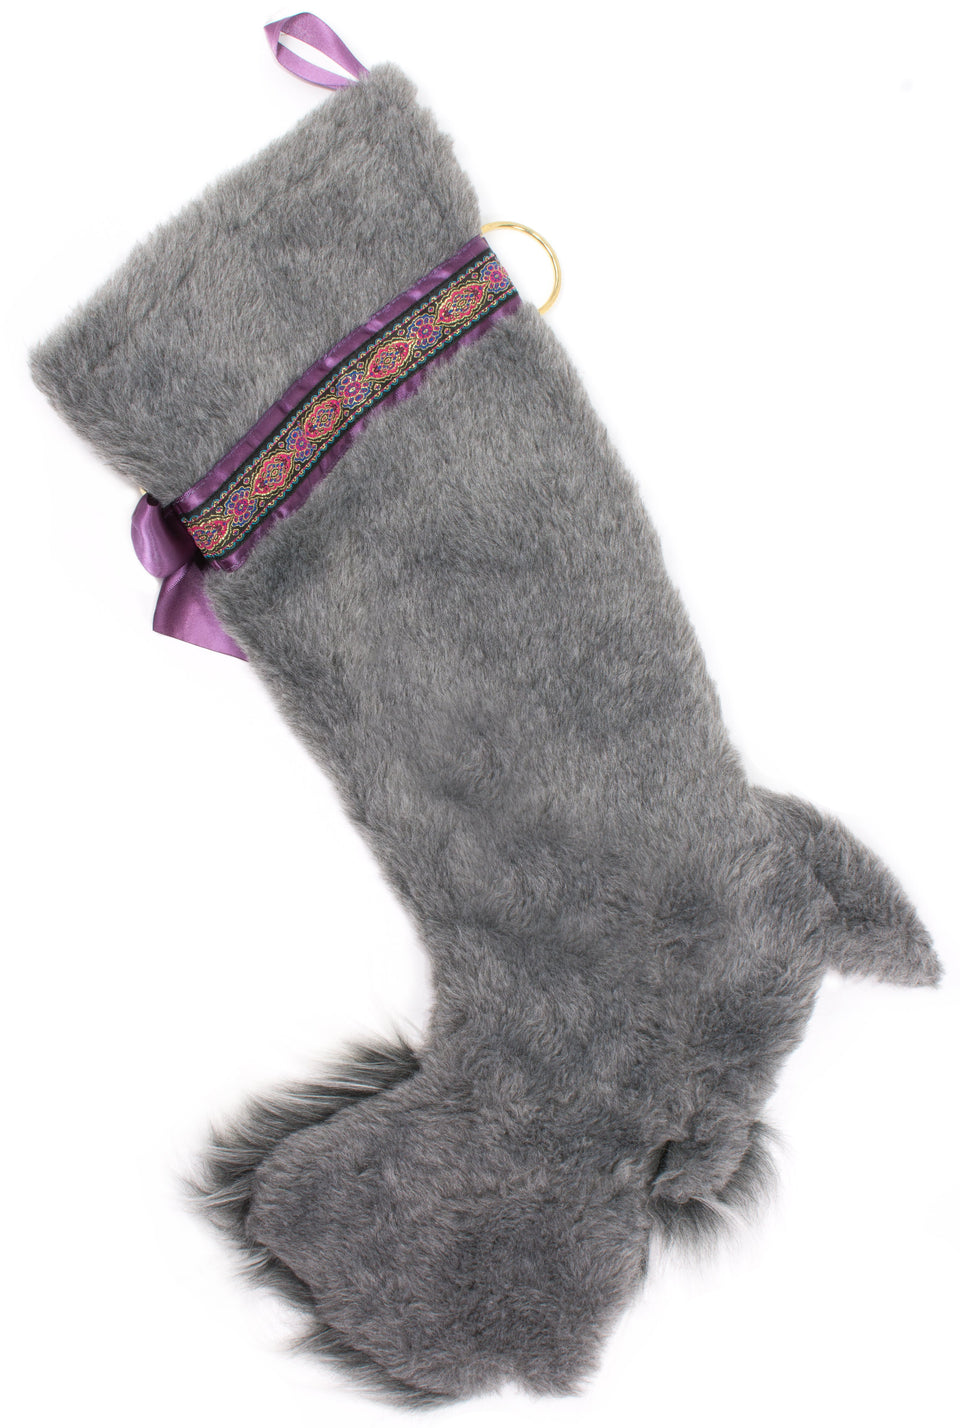 This Schnauzer shaped Christmas dog stocking is the perfect gift for stuffing toys and treats into to spoil your fur baby for Christmas, or whatever holiday you celebrate!